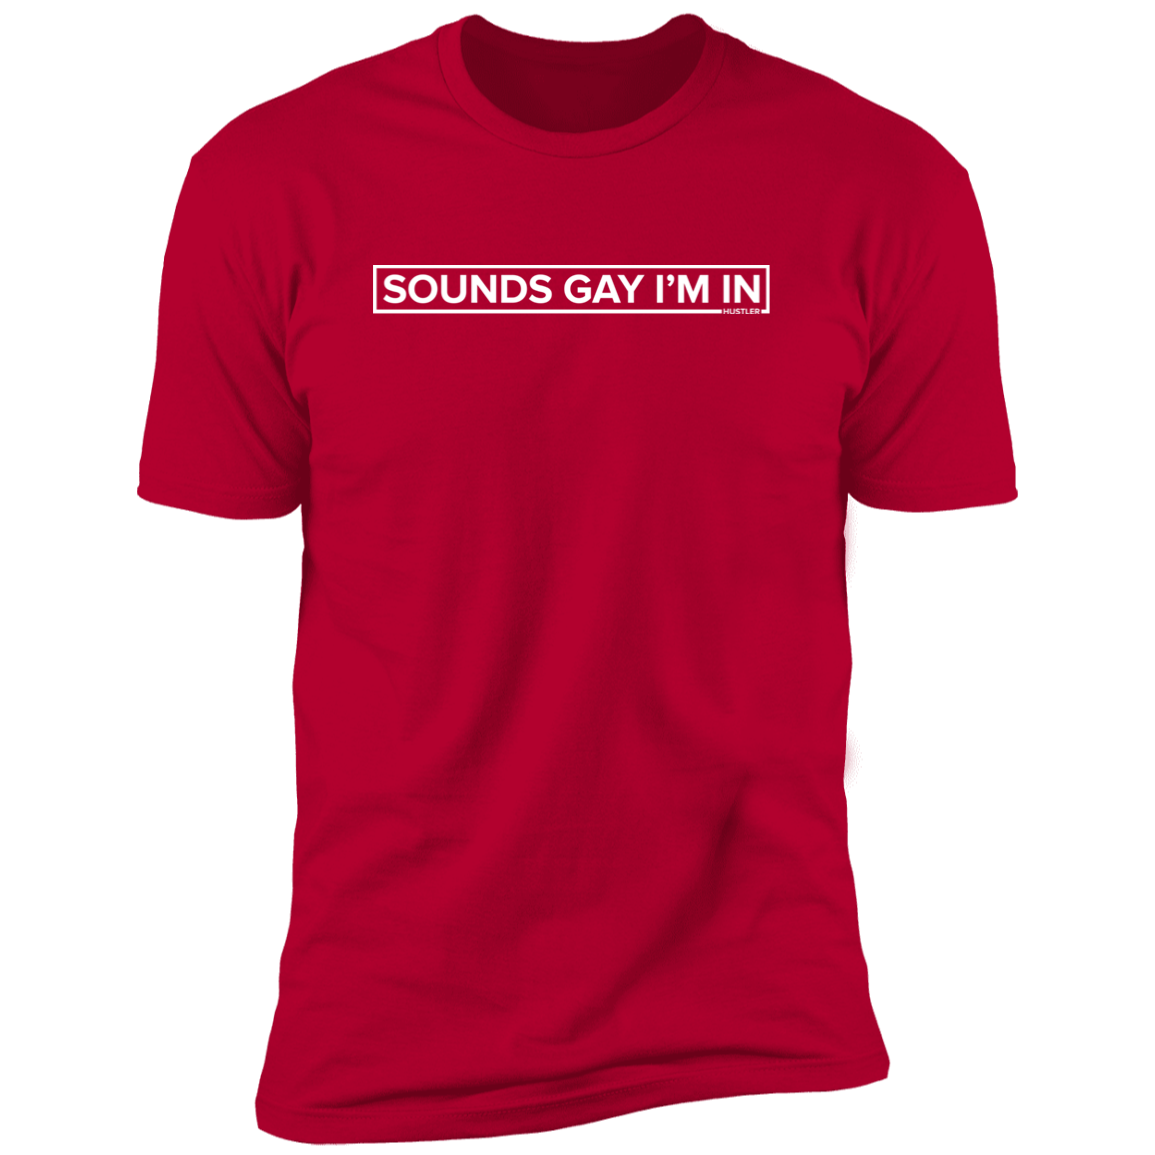 Sounds Gay, I'm In T-Shirt